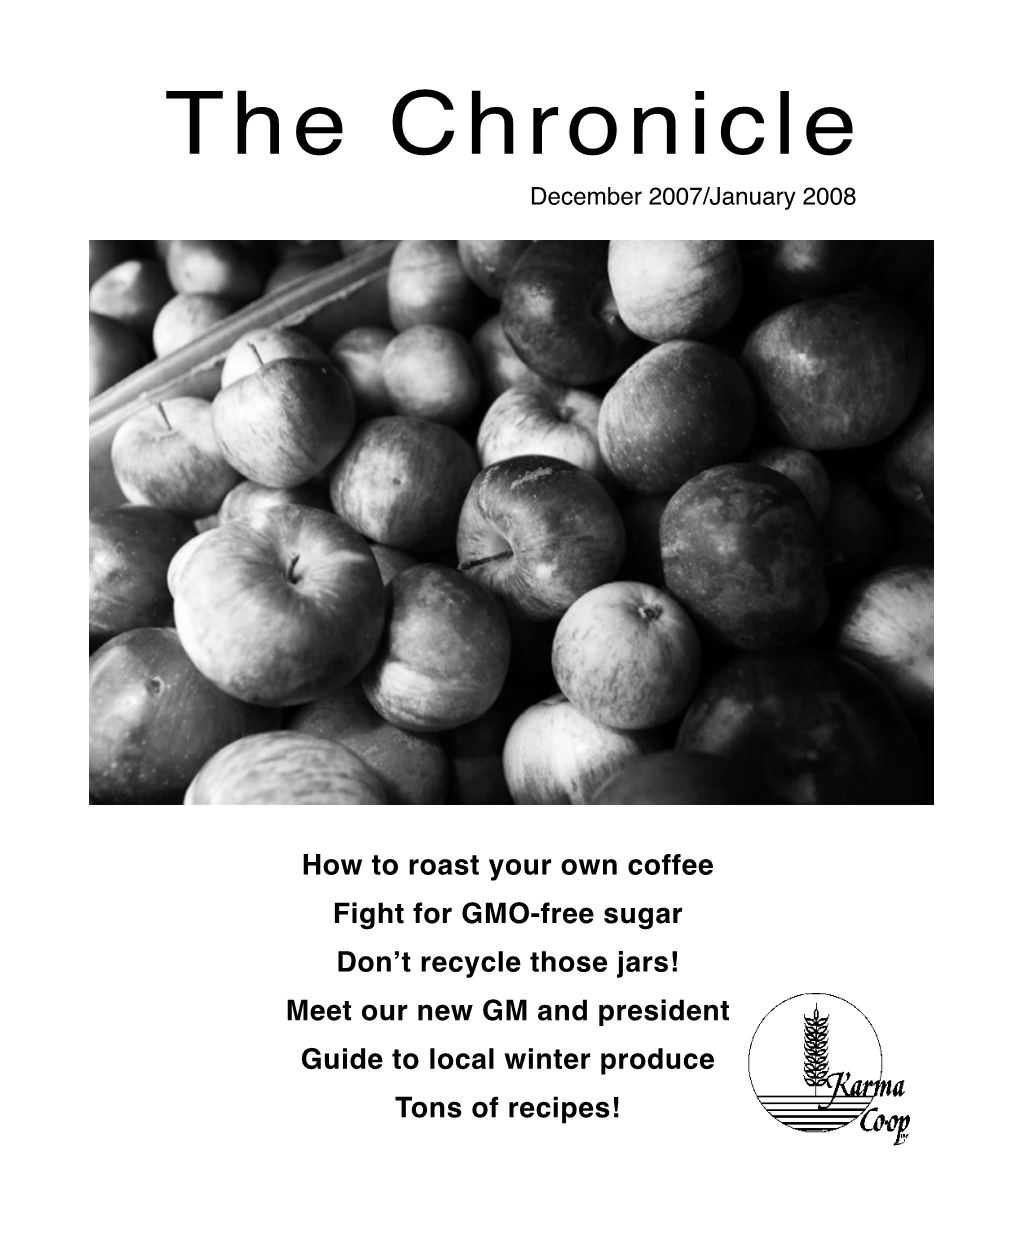 The Chronicle December 2007/January 2008